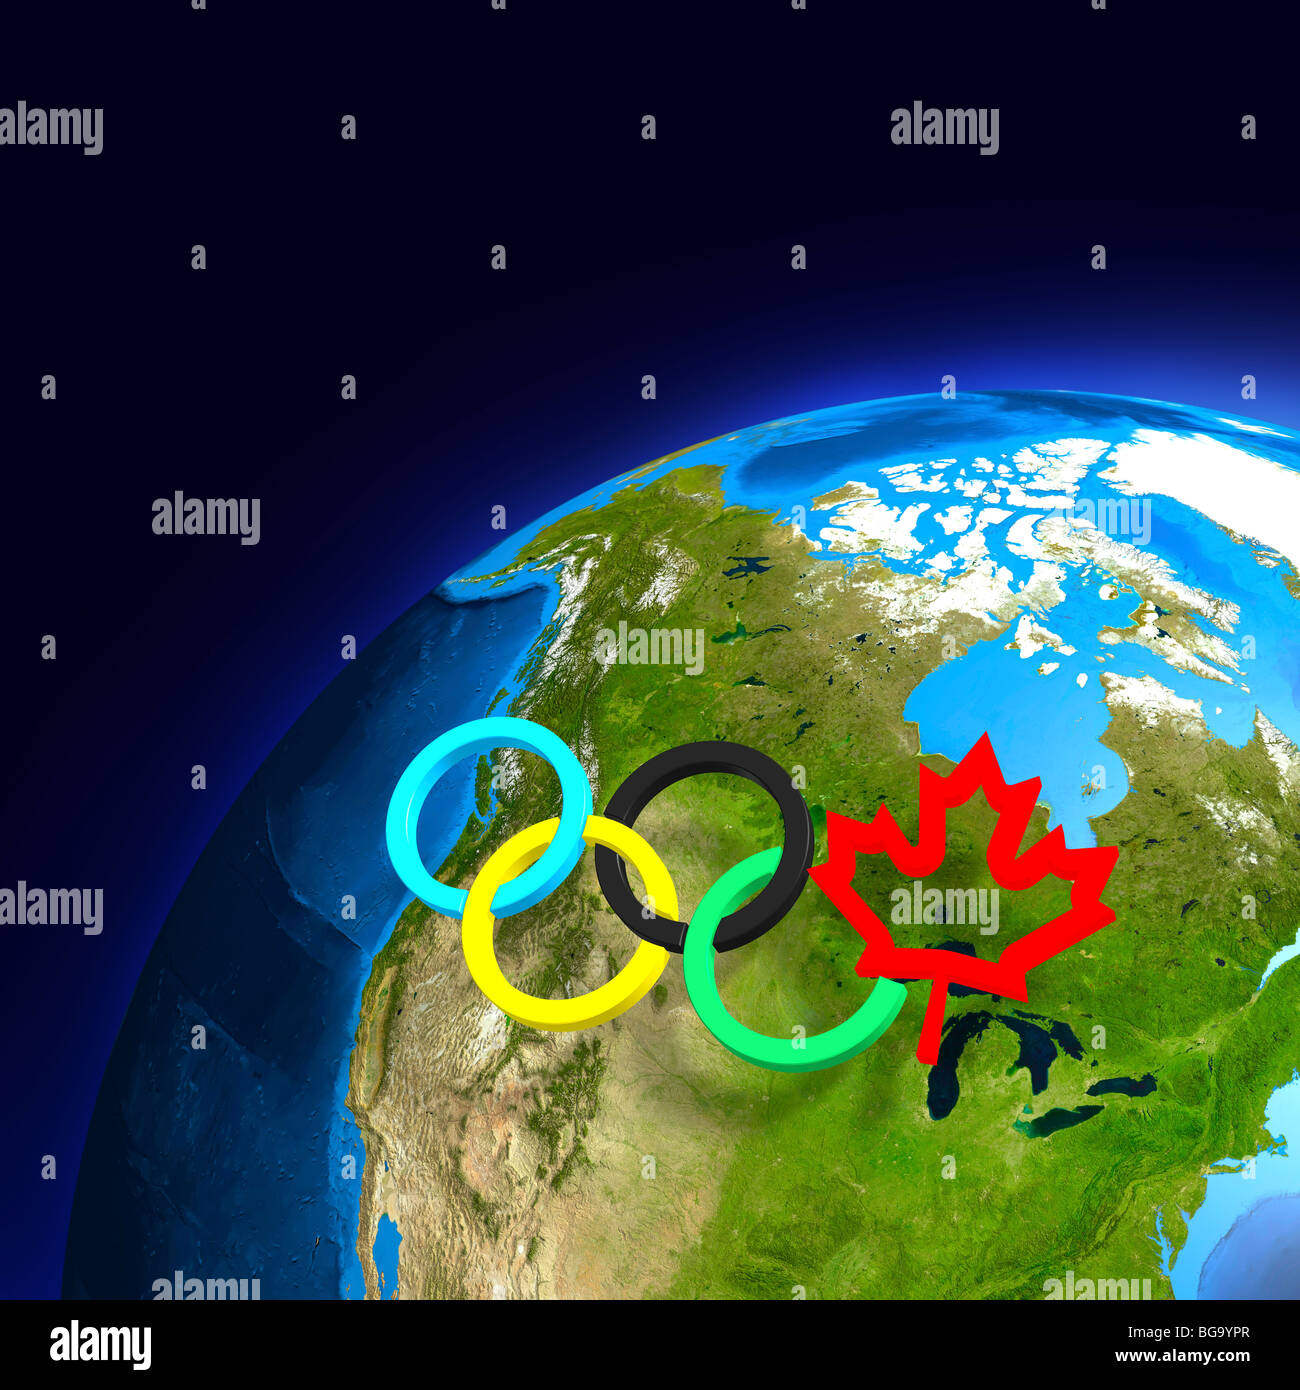 Olympic rings above Canada on the Earth globe. Vancouver 2010 concept with a maple leaf symbol. Stock Photo